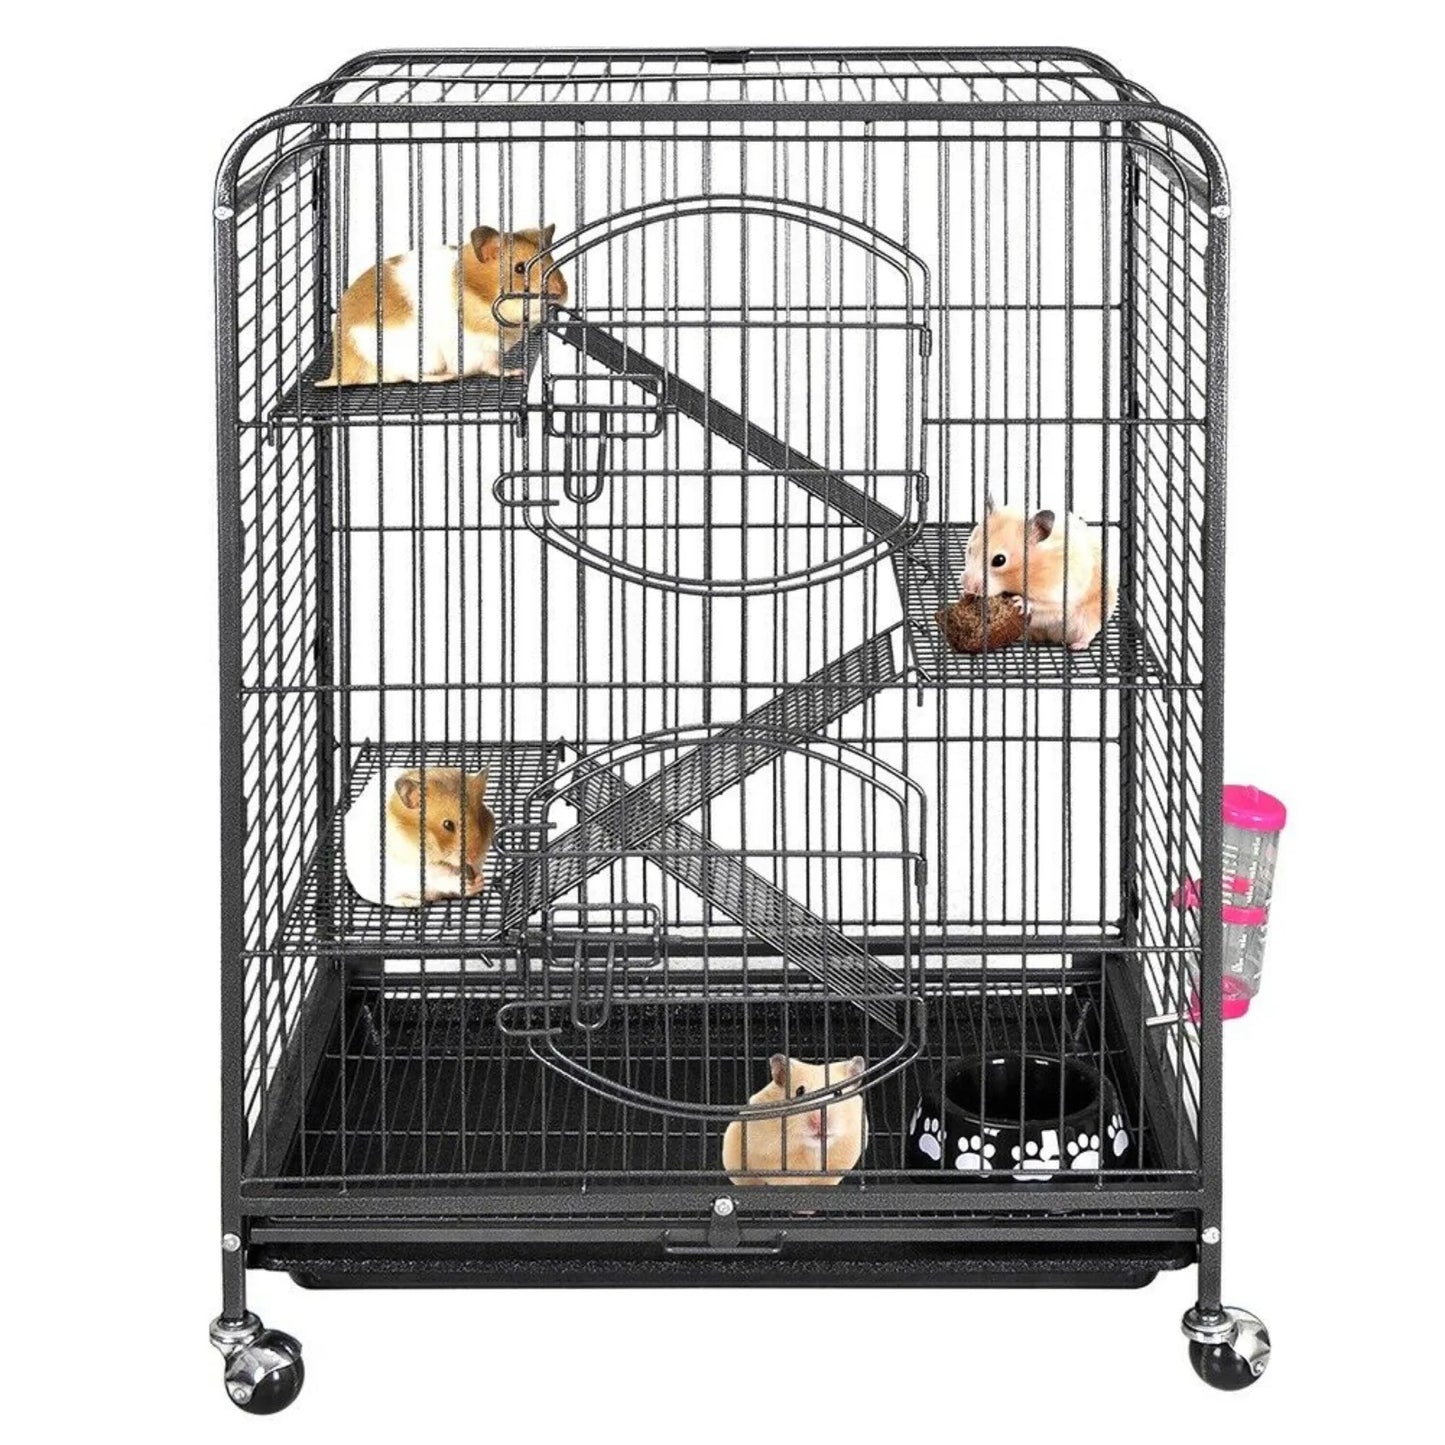 Free shipping US Ferret Cage Rabbit Chinchilla Rat Cage Small Animal House 37" 4 Levels